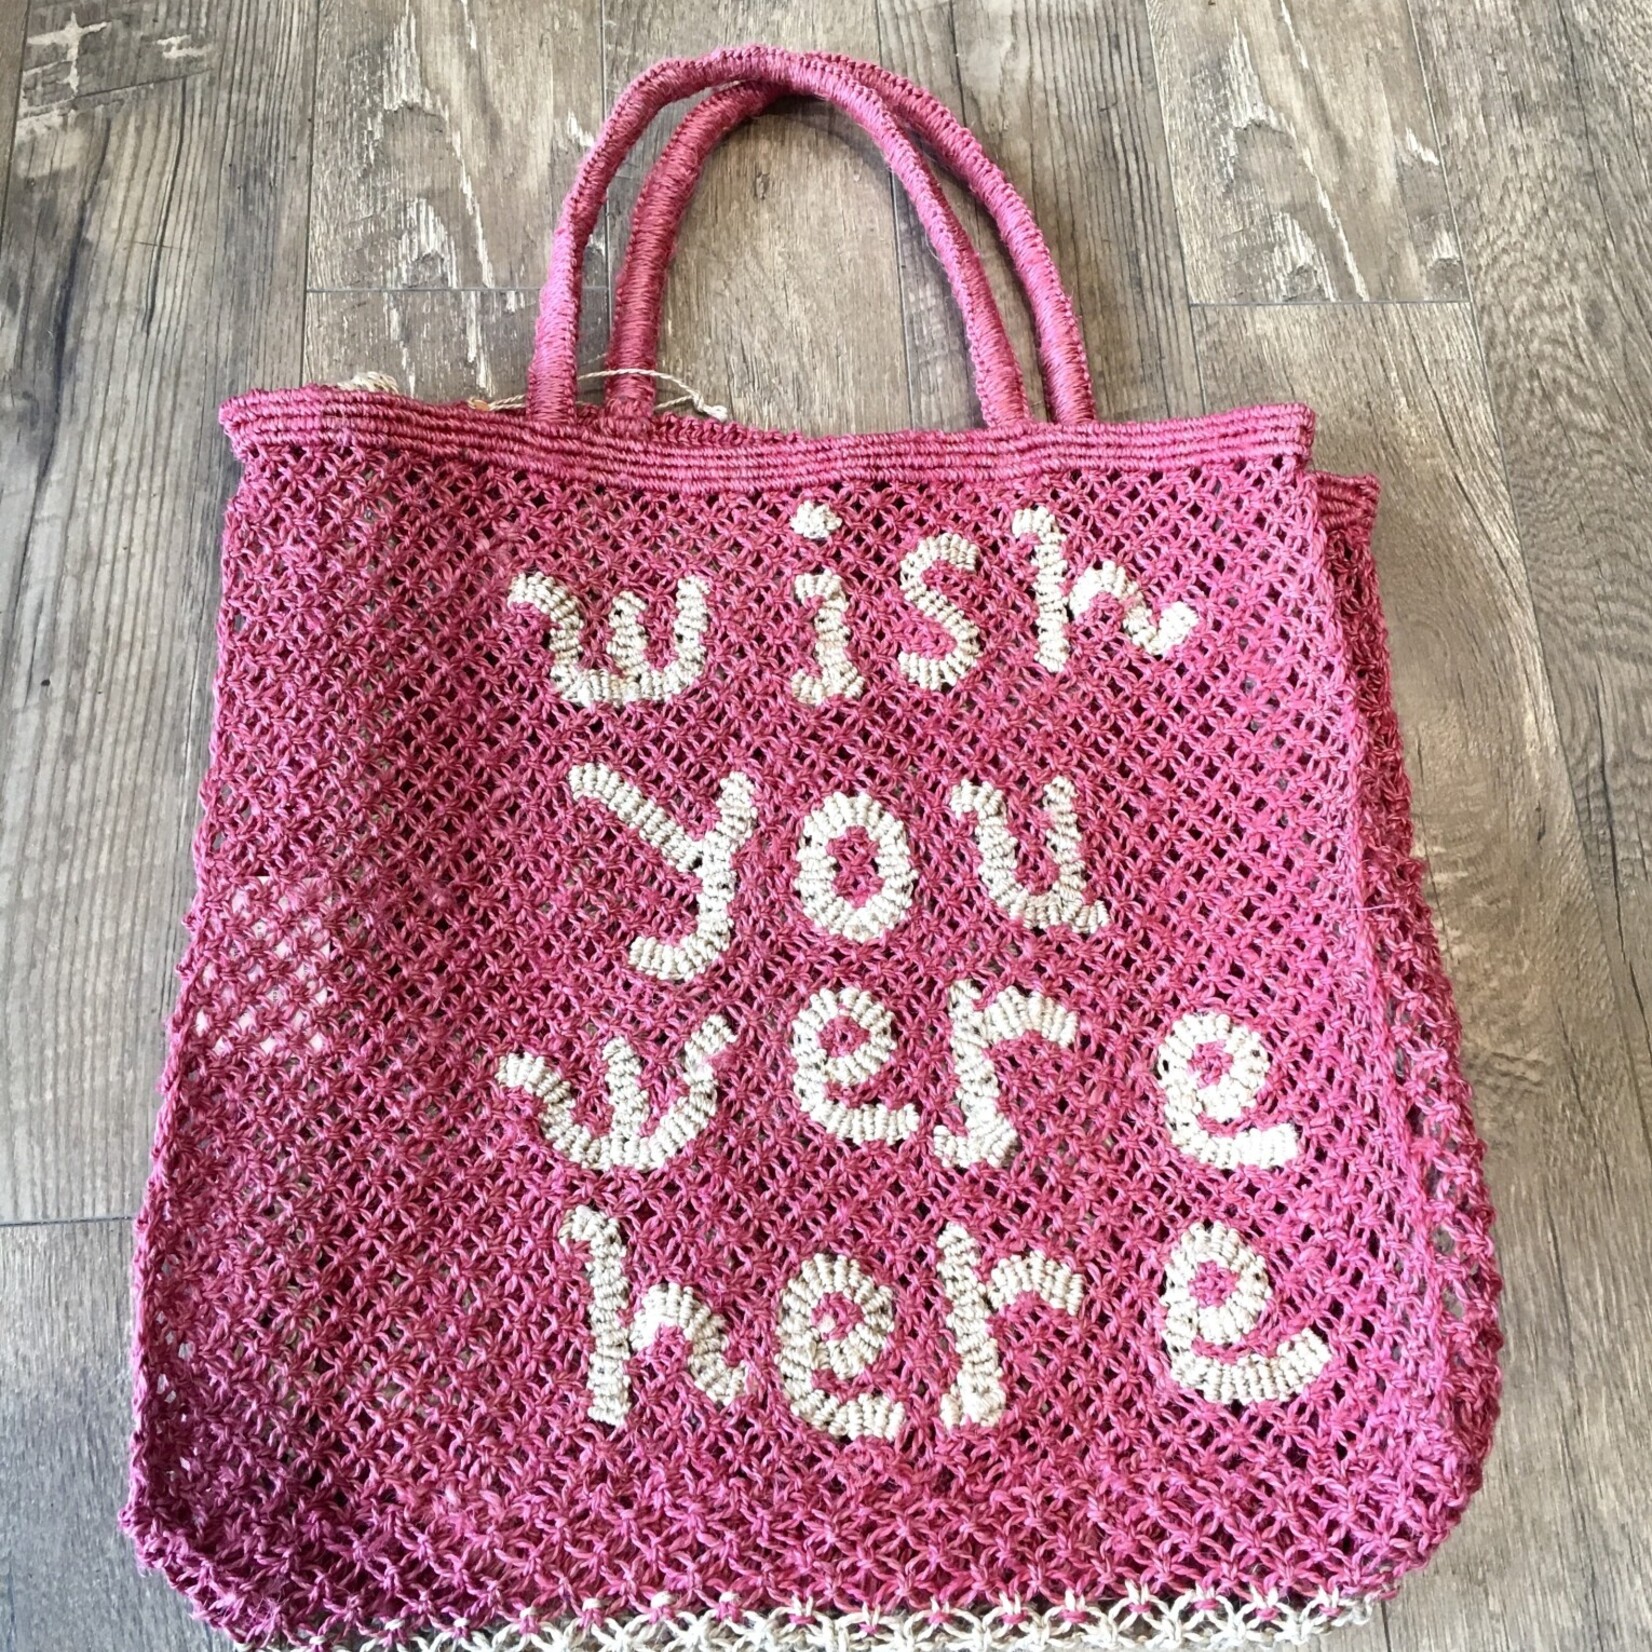 The Jacksons The Jacksons “Wish You Were Here” Bag